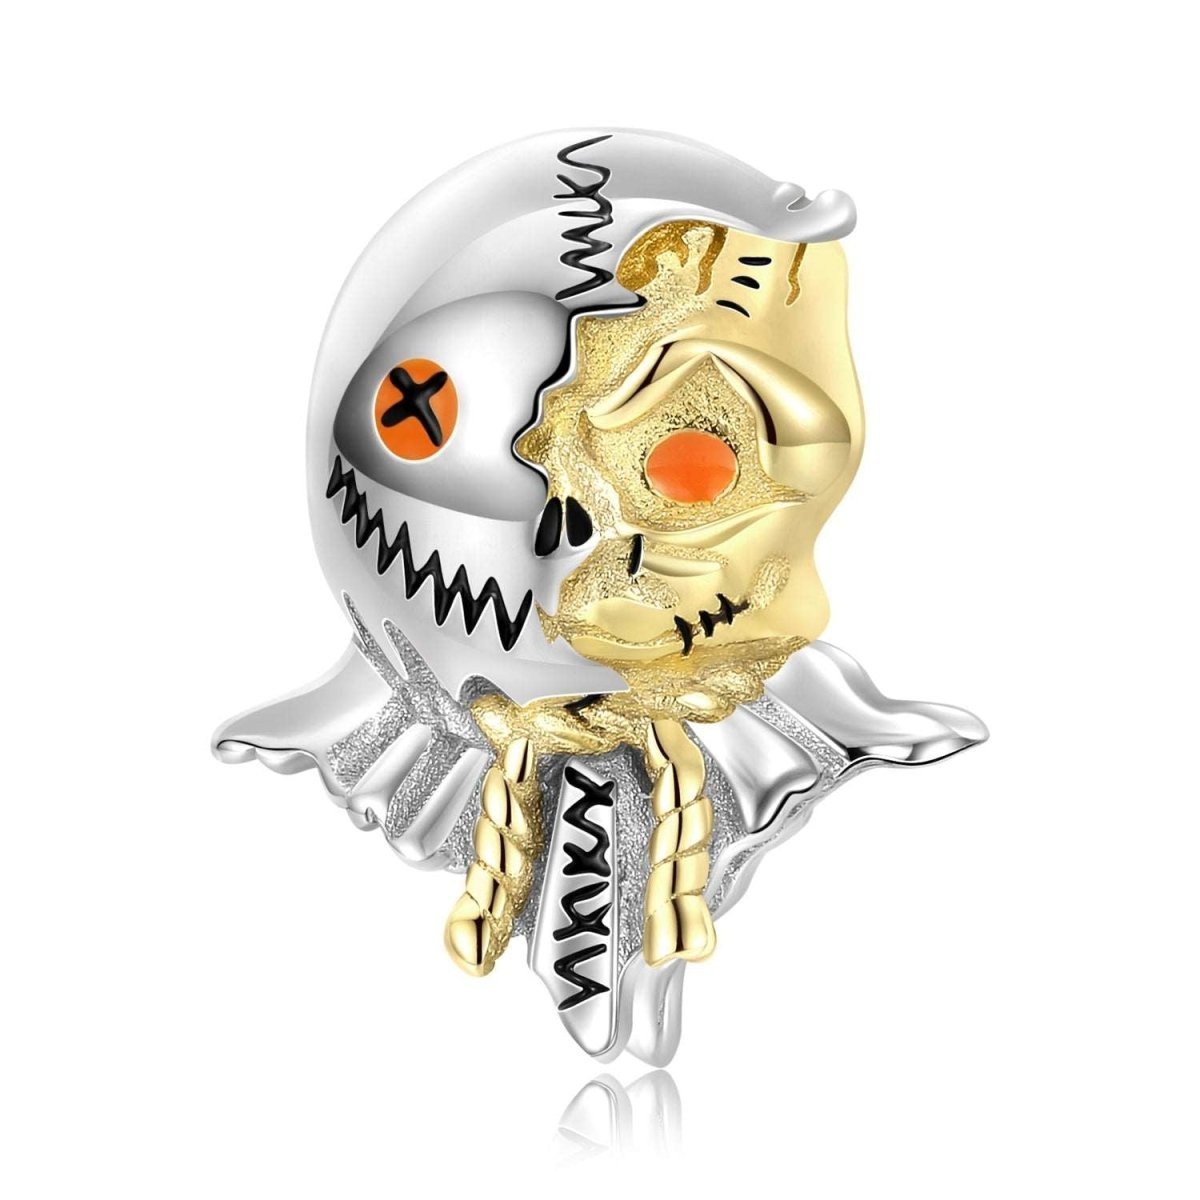 Enamel Skull Cartoon Charms - Uniquely You Online - Charms